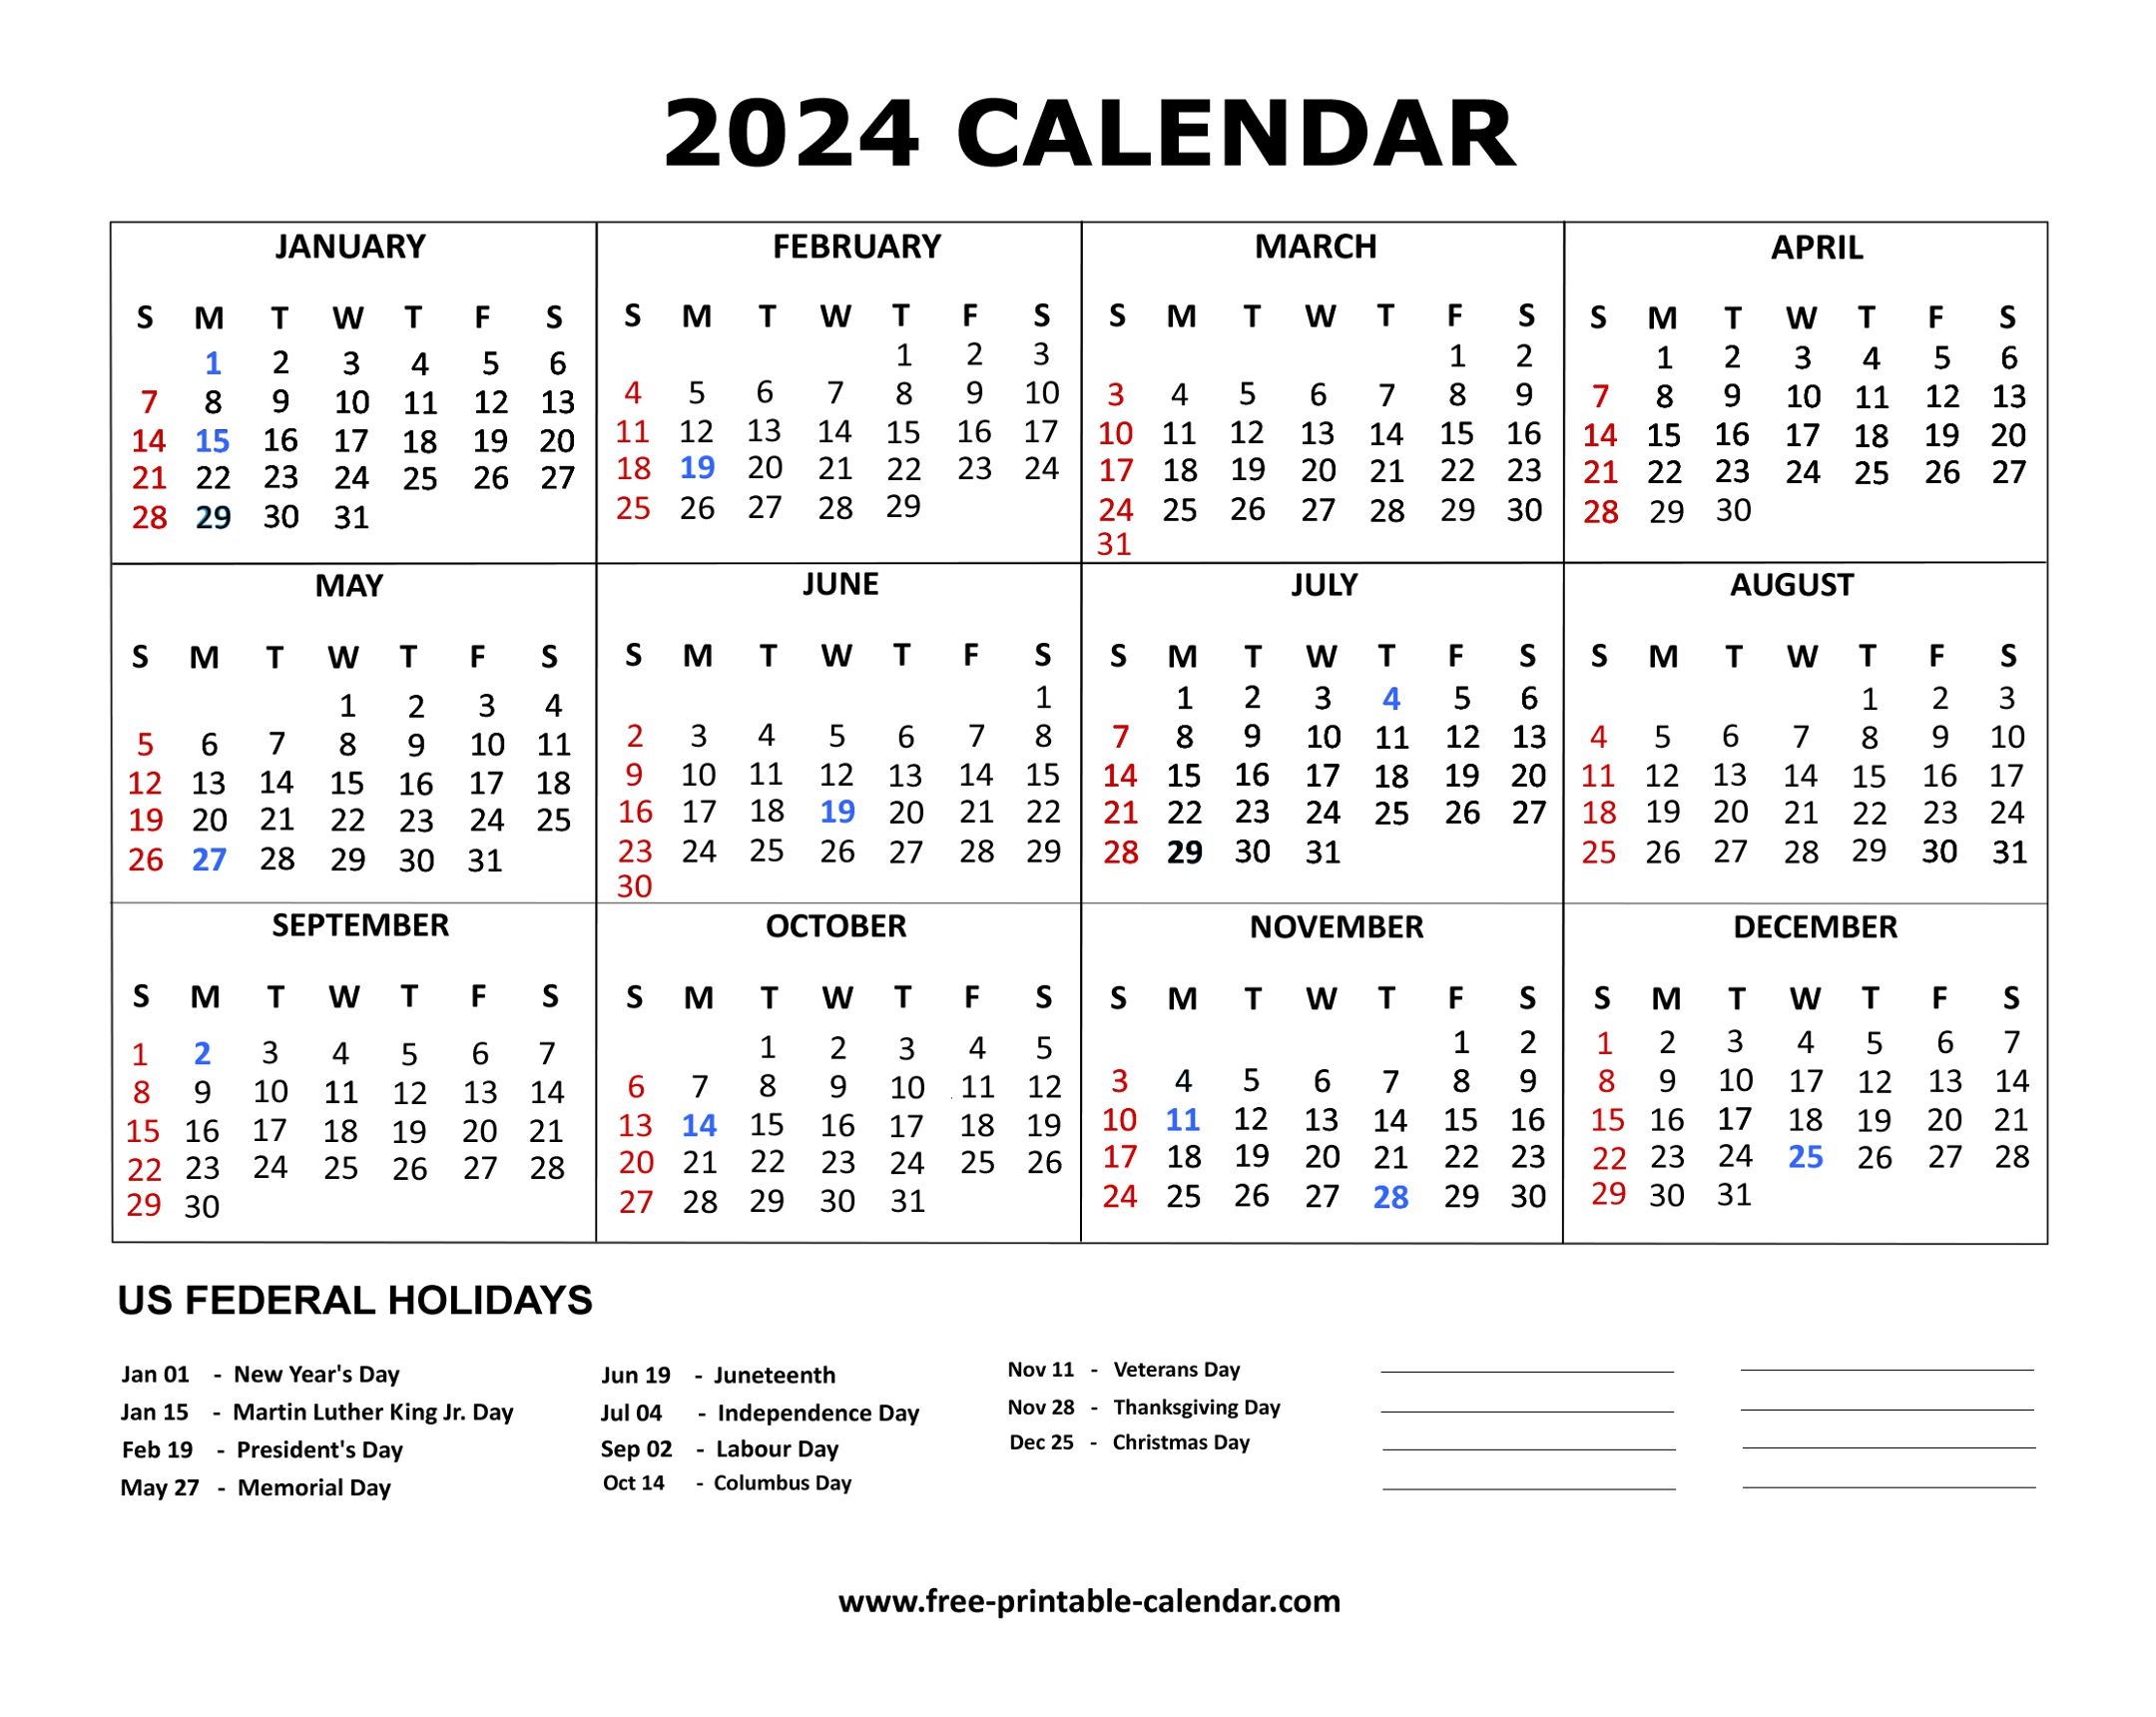 2024 Calendar intended for Free Printable Calendar 2024With Holidays